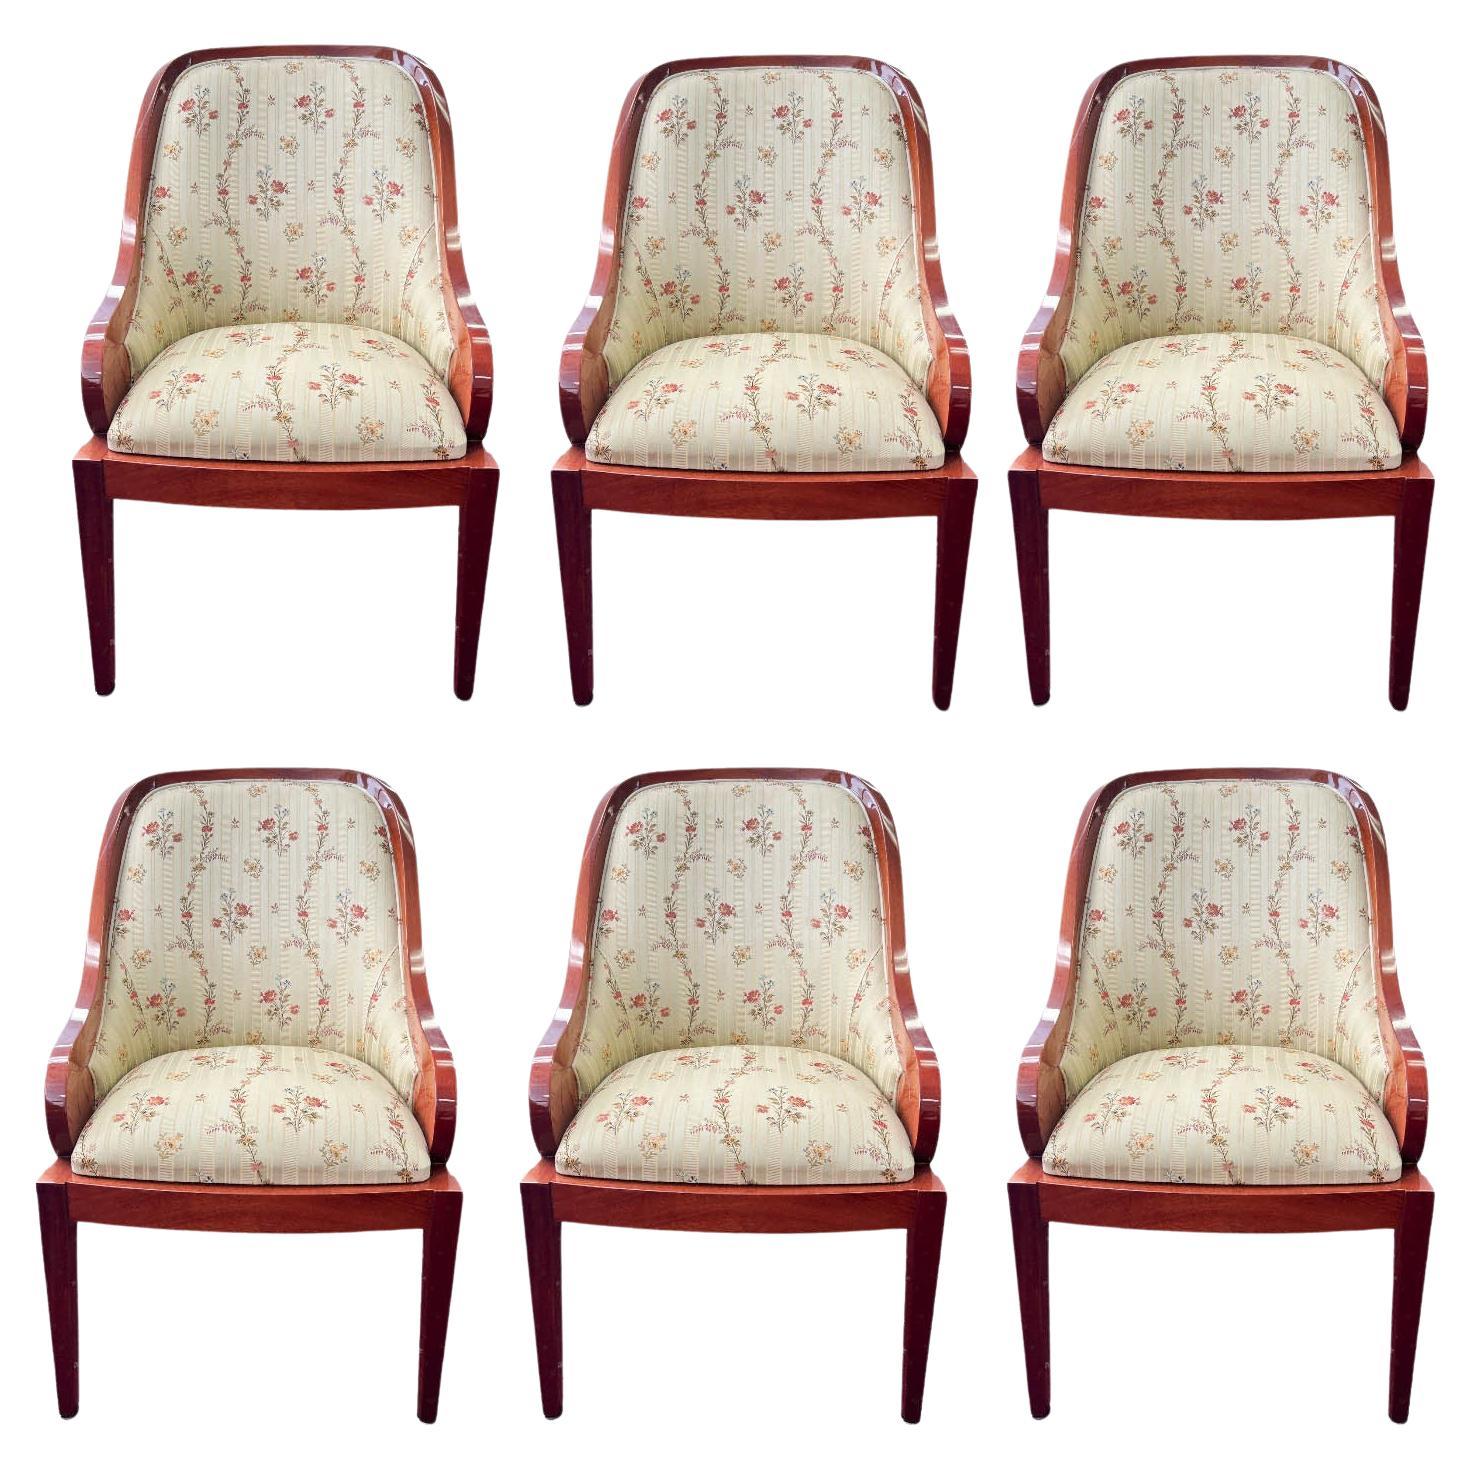 Set of 6 English Art Deco Dining Chairs